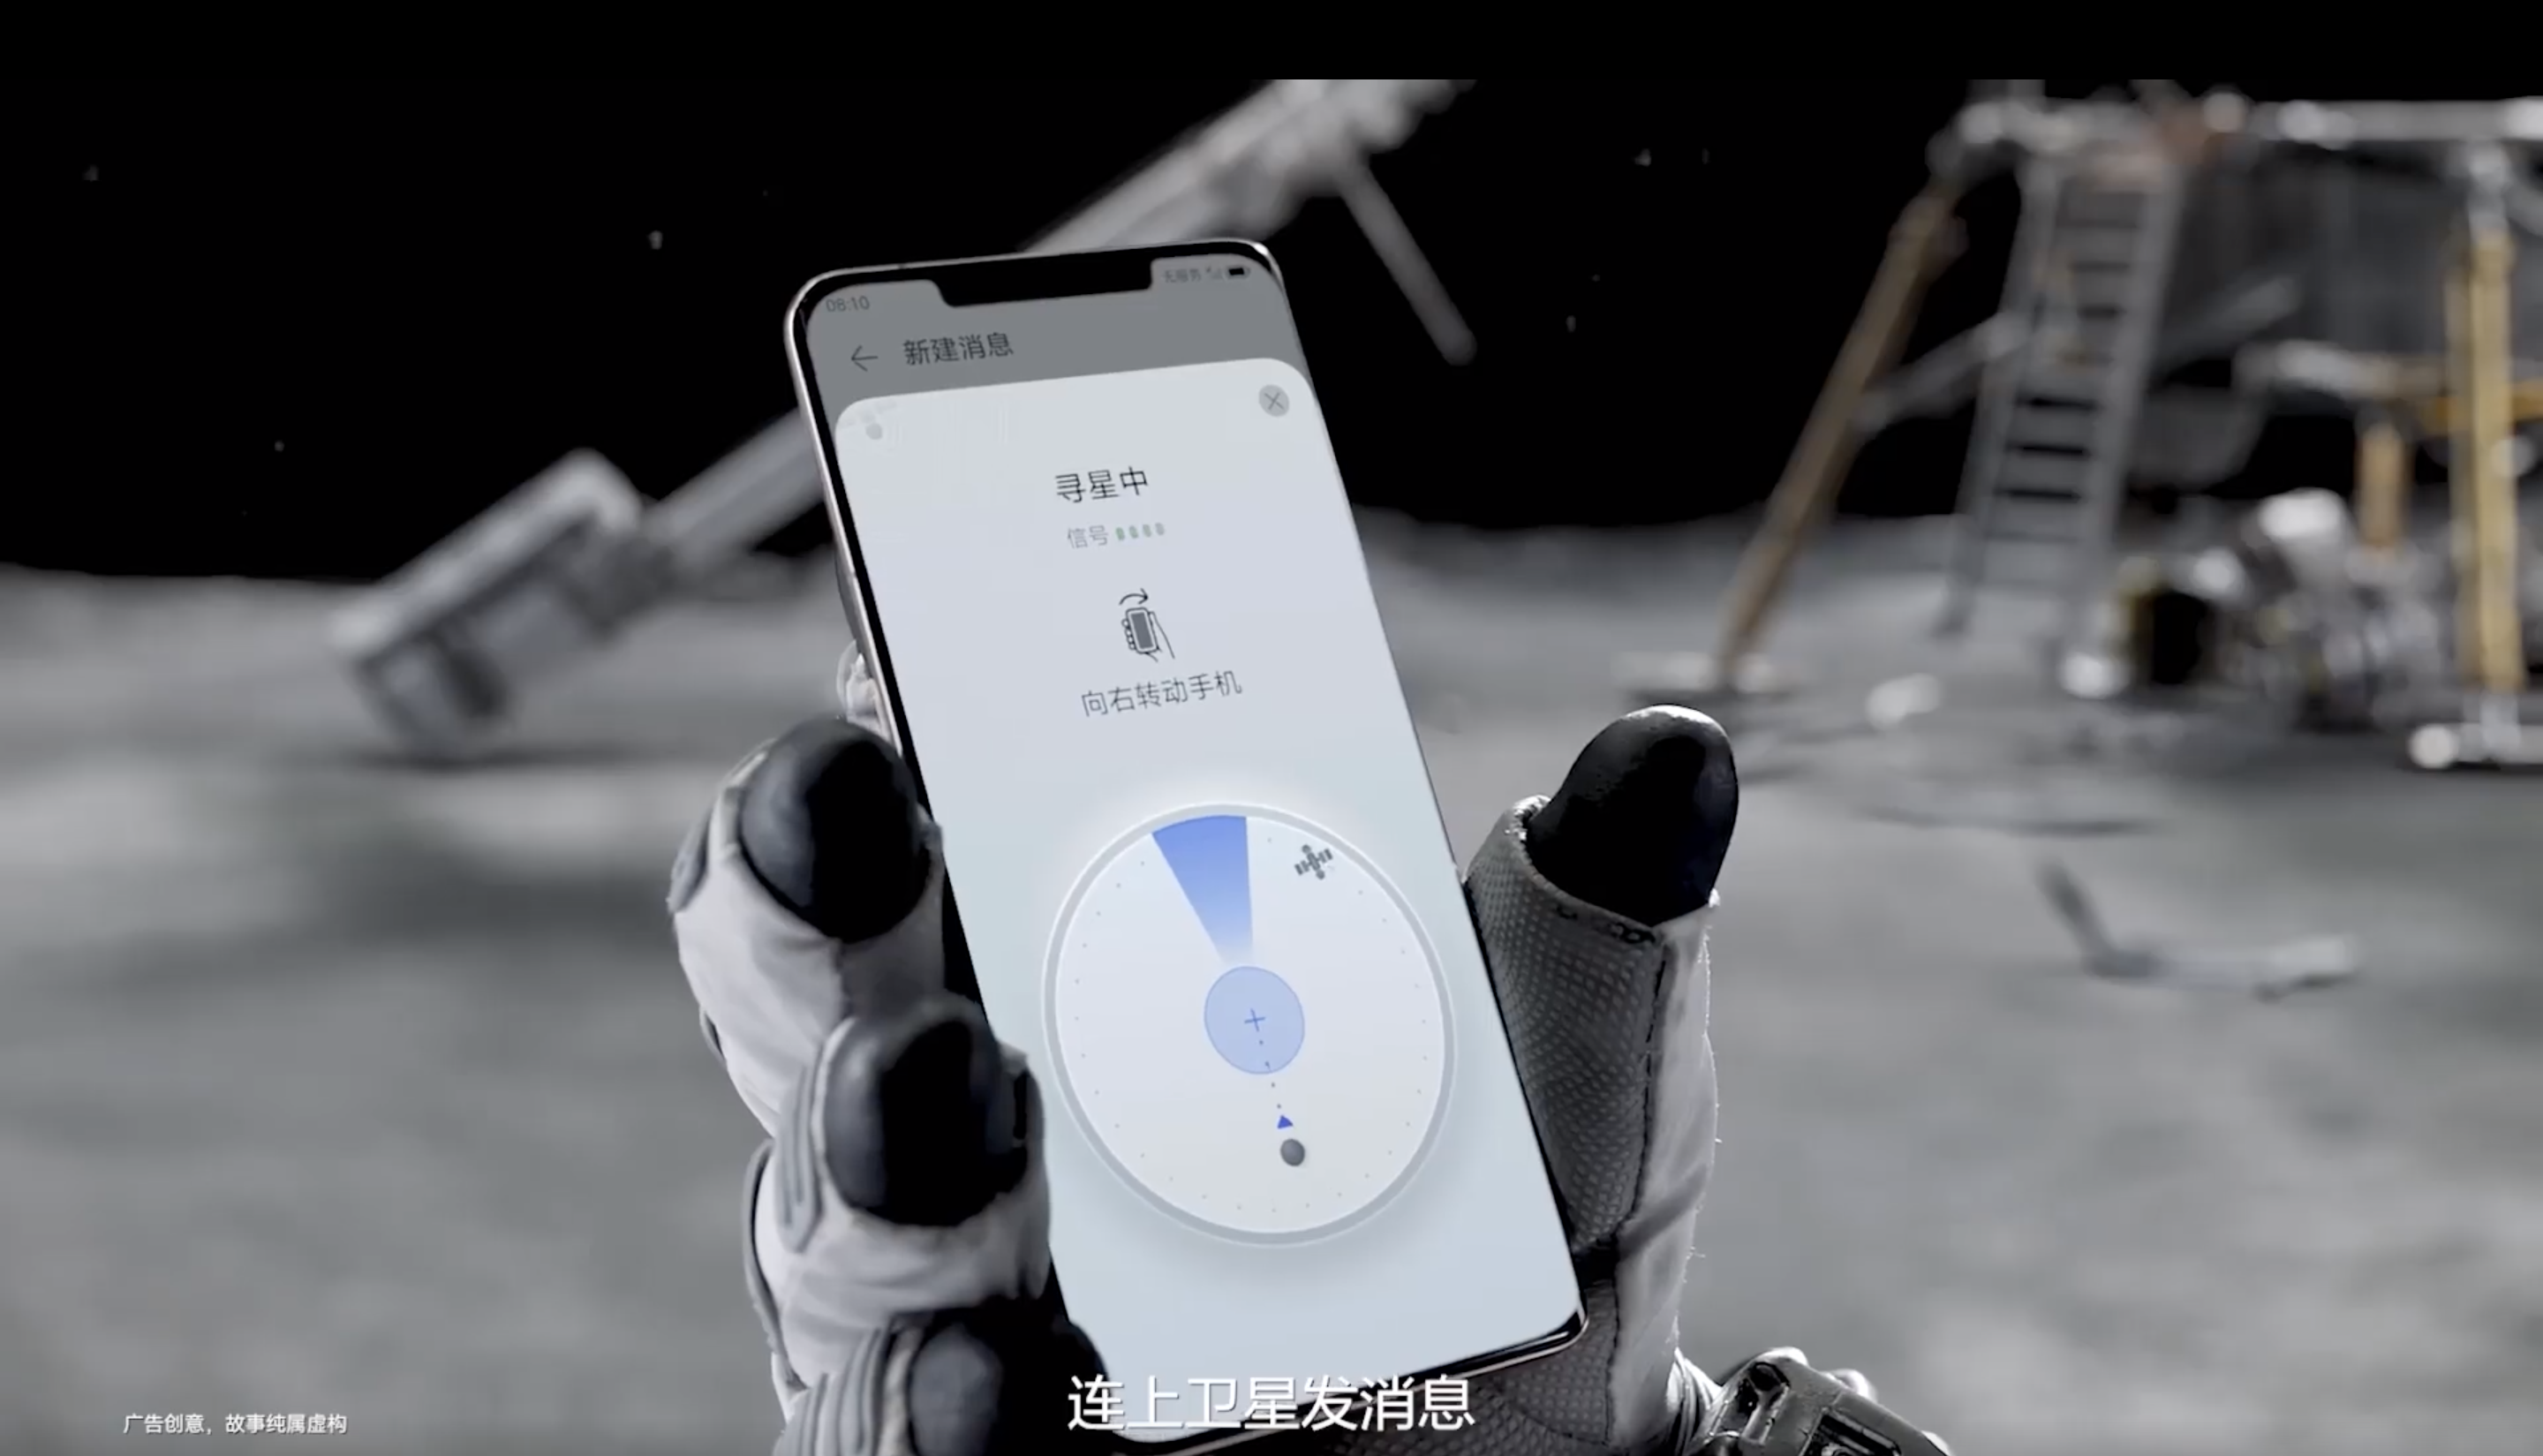 A screenshot from Huawei's latest campaign released on December 21, 2022, that features satellite connectivity on its Mate 50 phones.